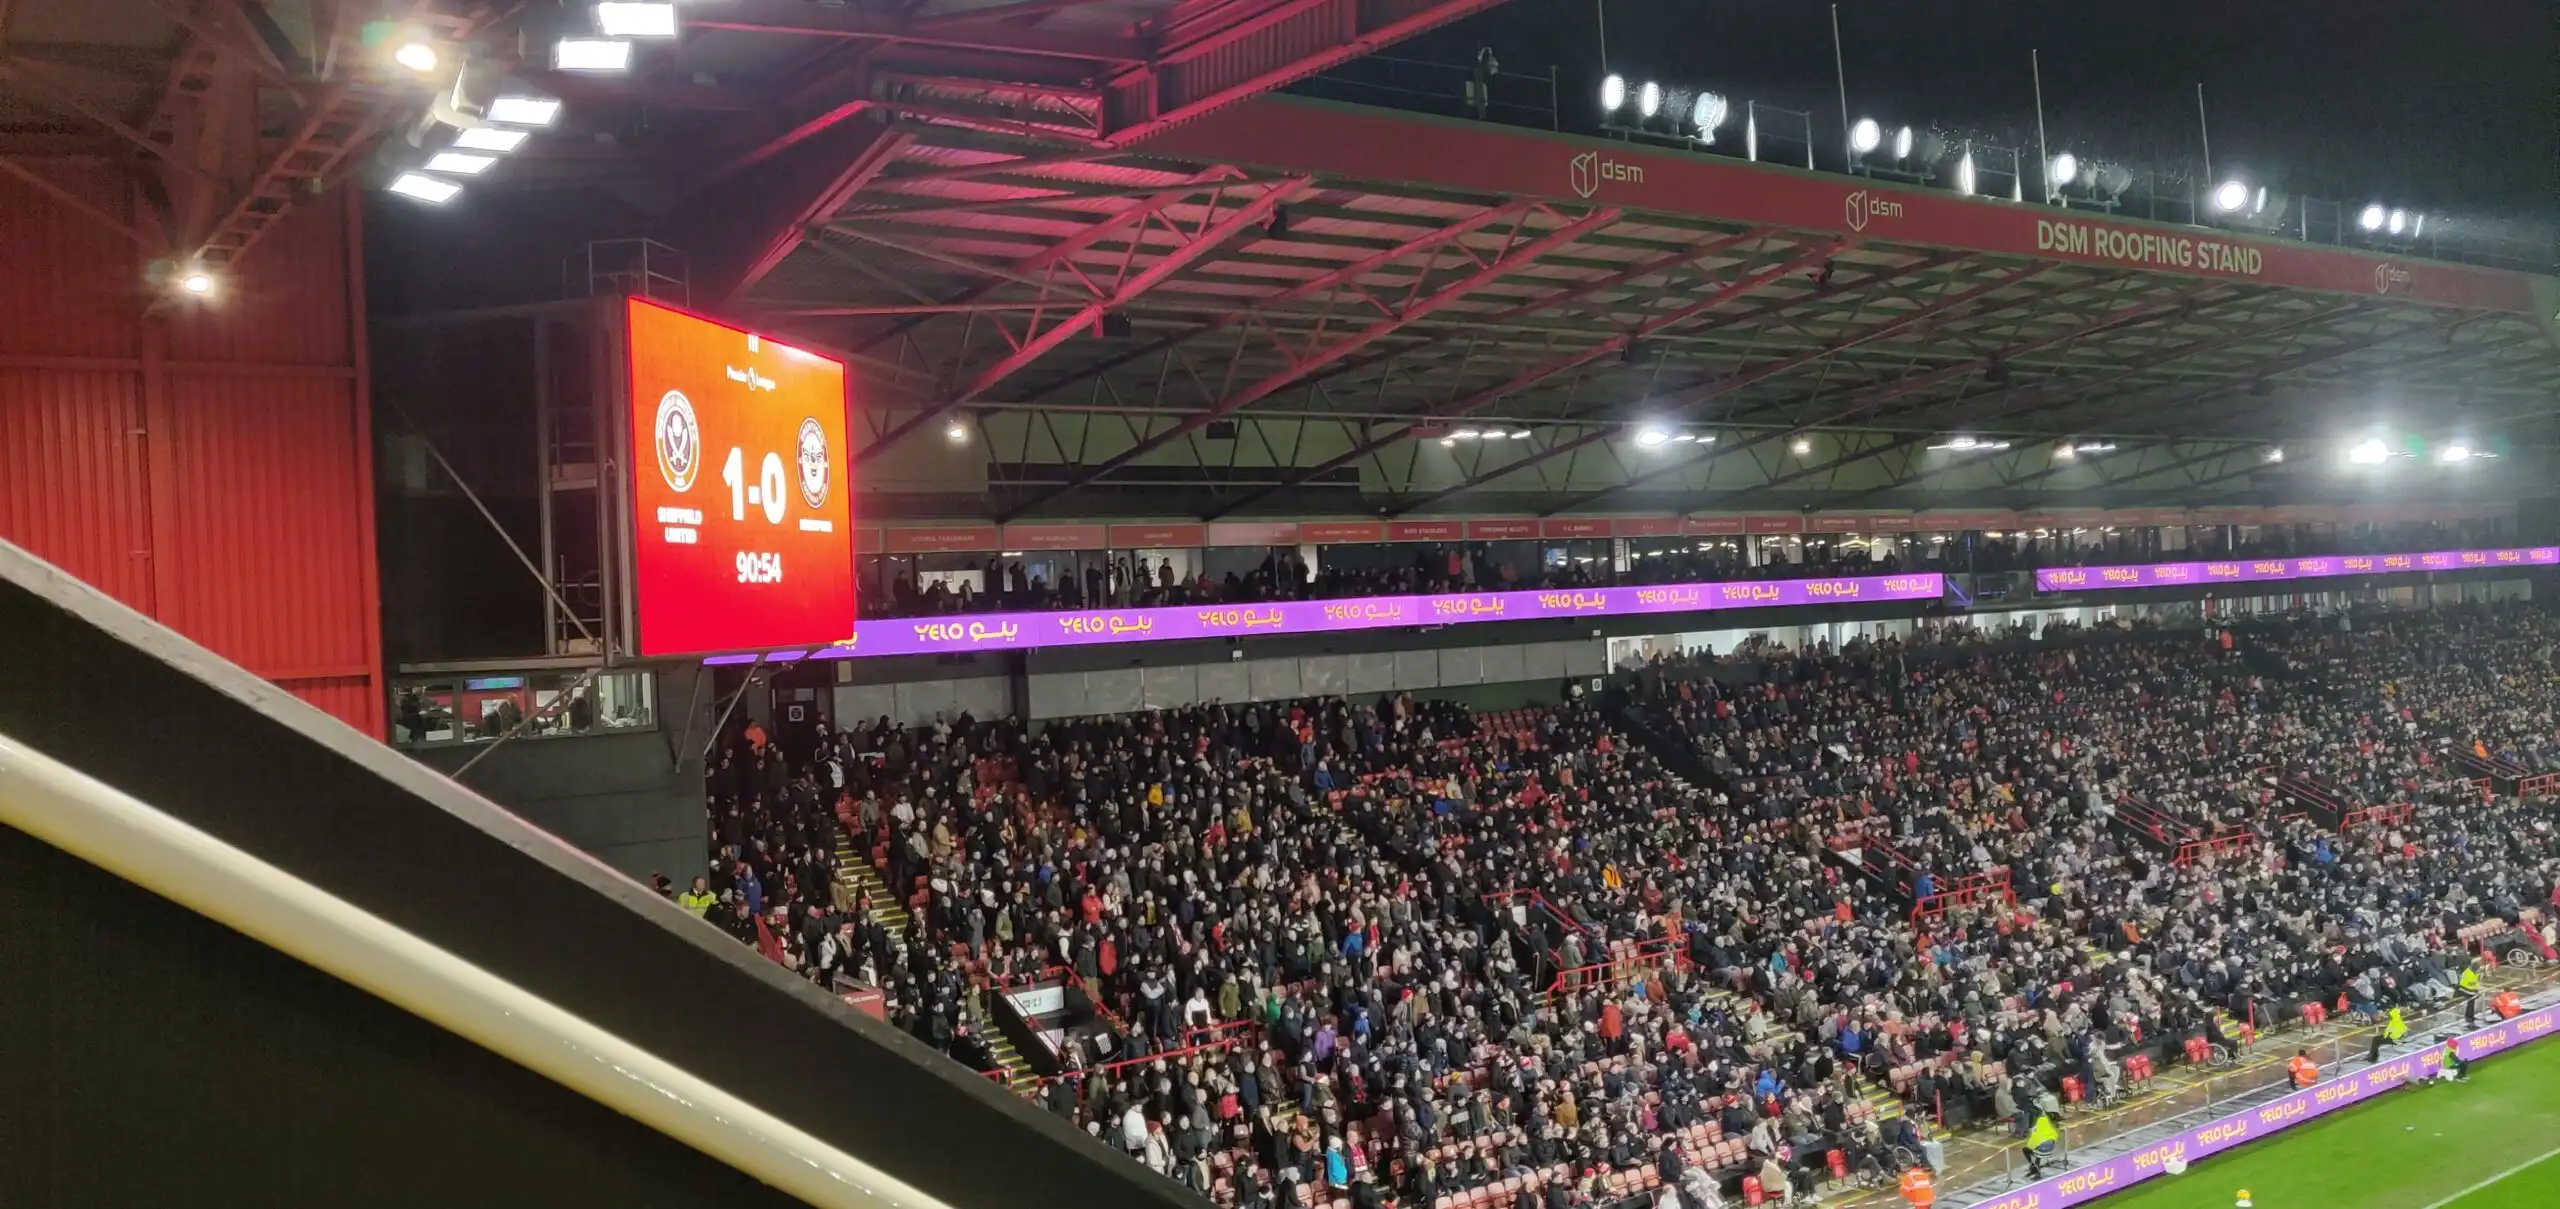 a view of DSM roofing stand when and the corner screen stating 1-0 favouring Sheffield united vs brentford EPL season 23/24